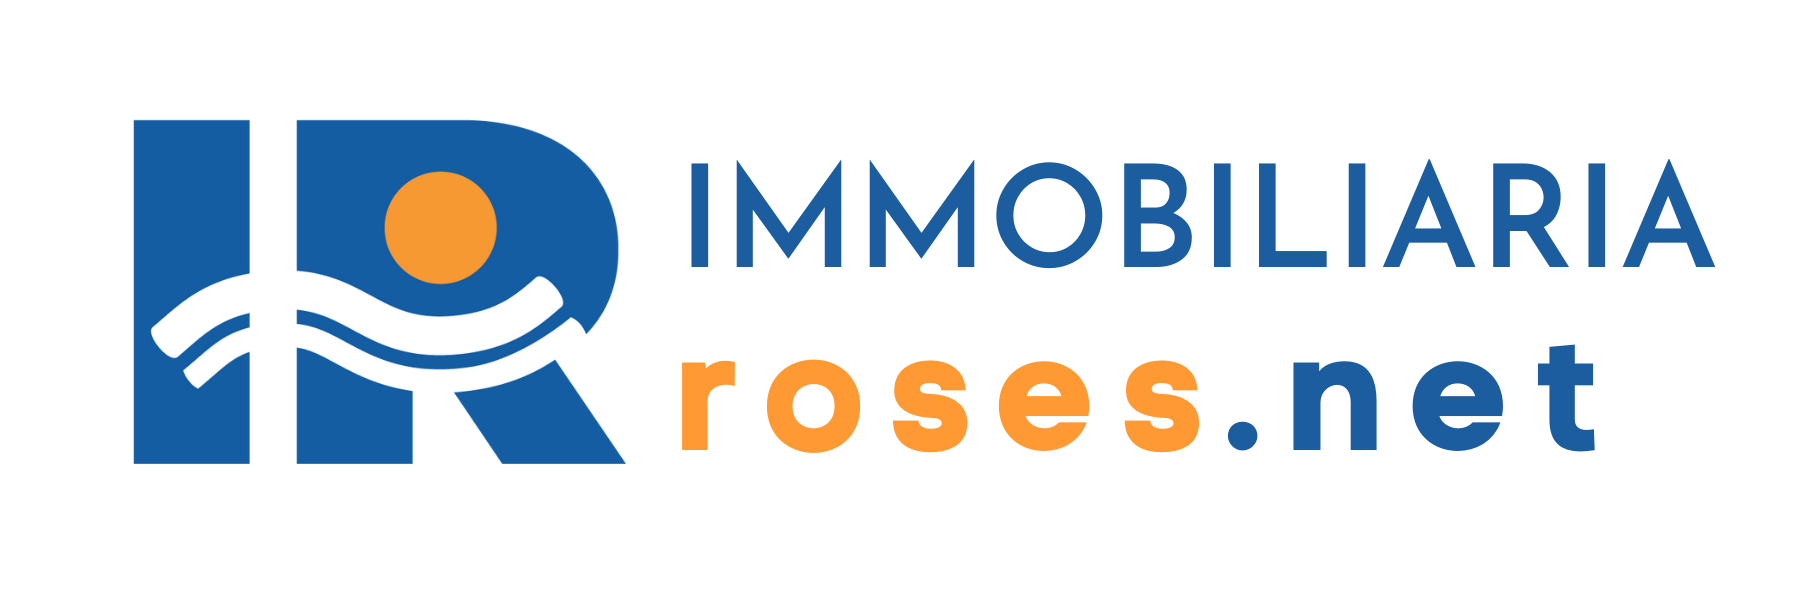 Immobiliaria Immo Roses.net Roses